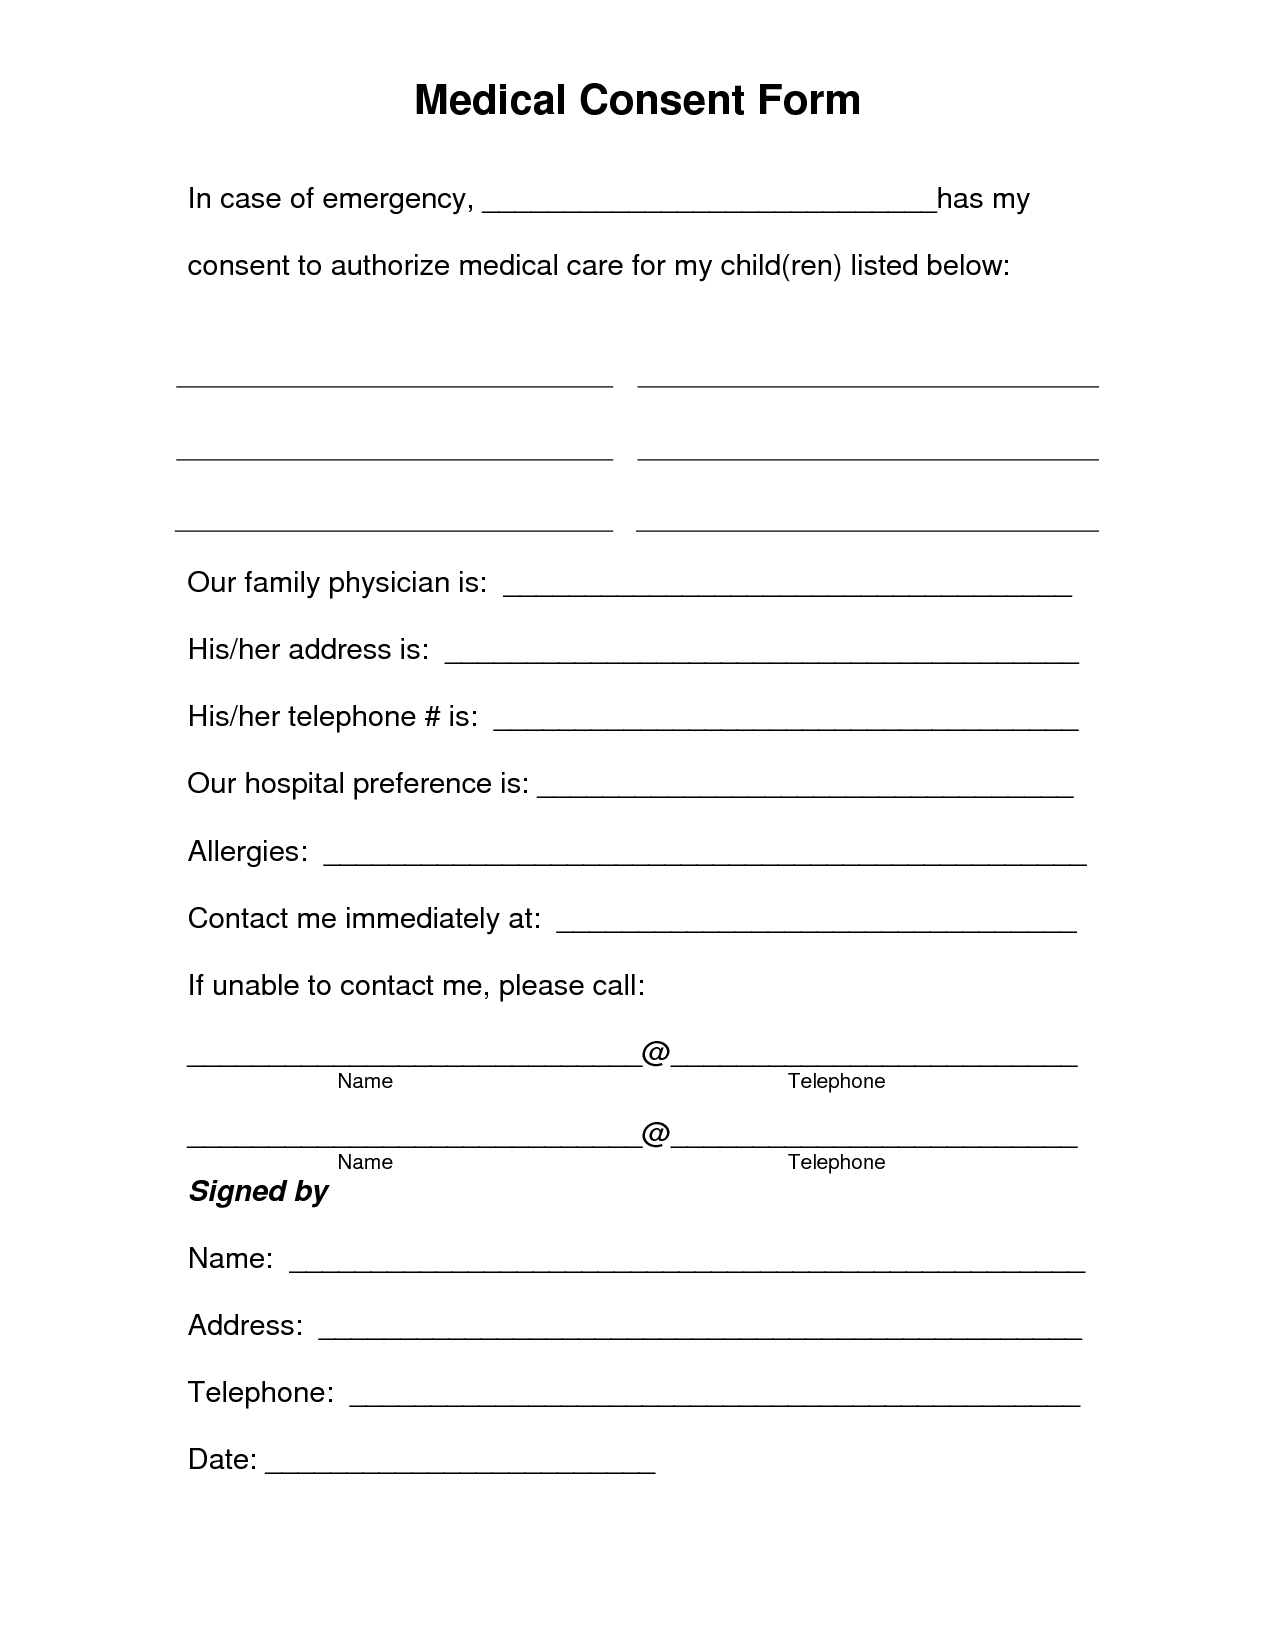 Free Printable Medical Consent Form | Free Medical Consent Form - Free Printable Child Medical Consent Form